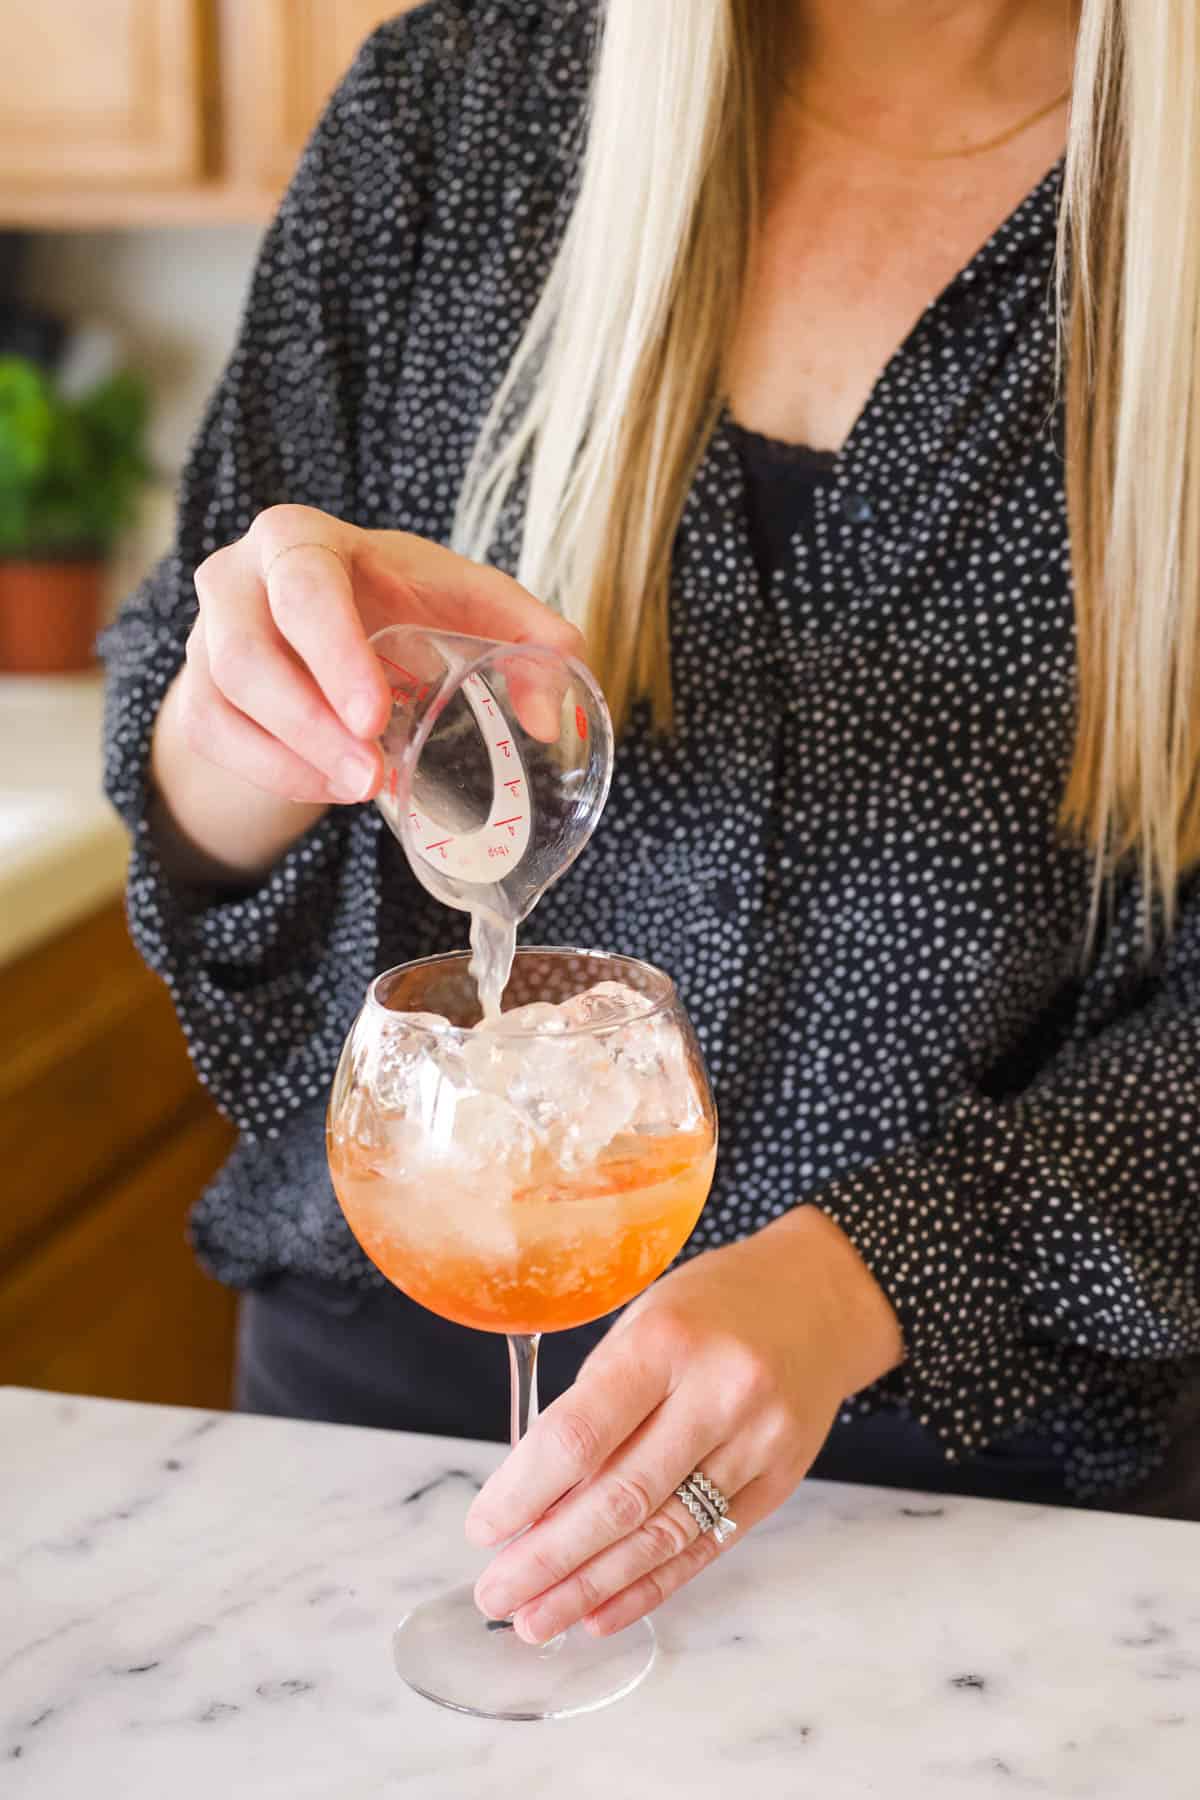 Adding fresh lime juice to a wine glass filled with ice.